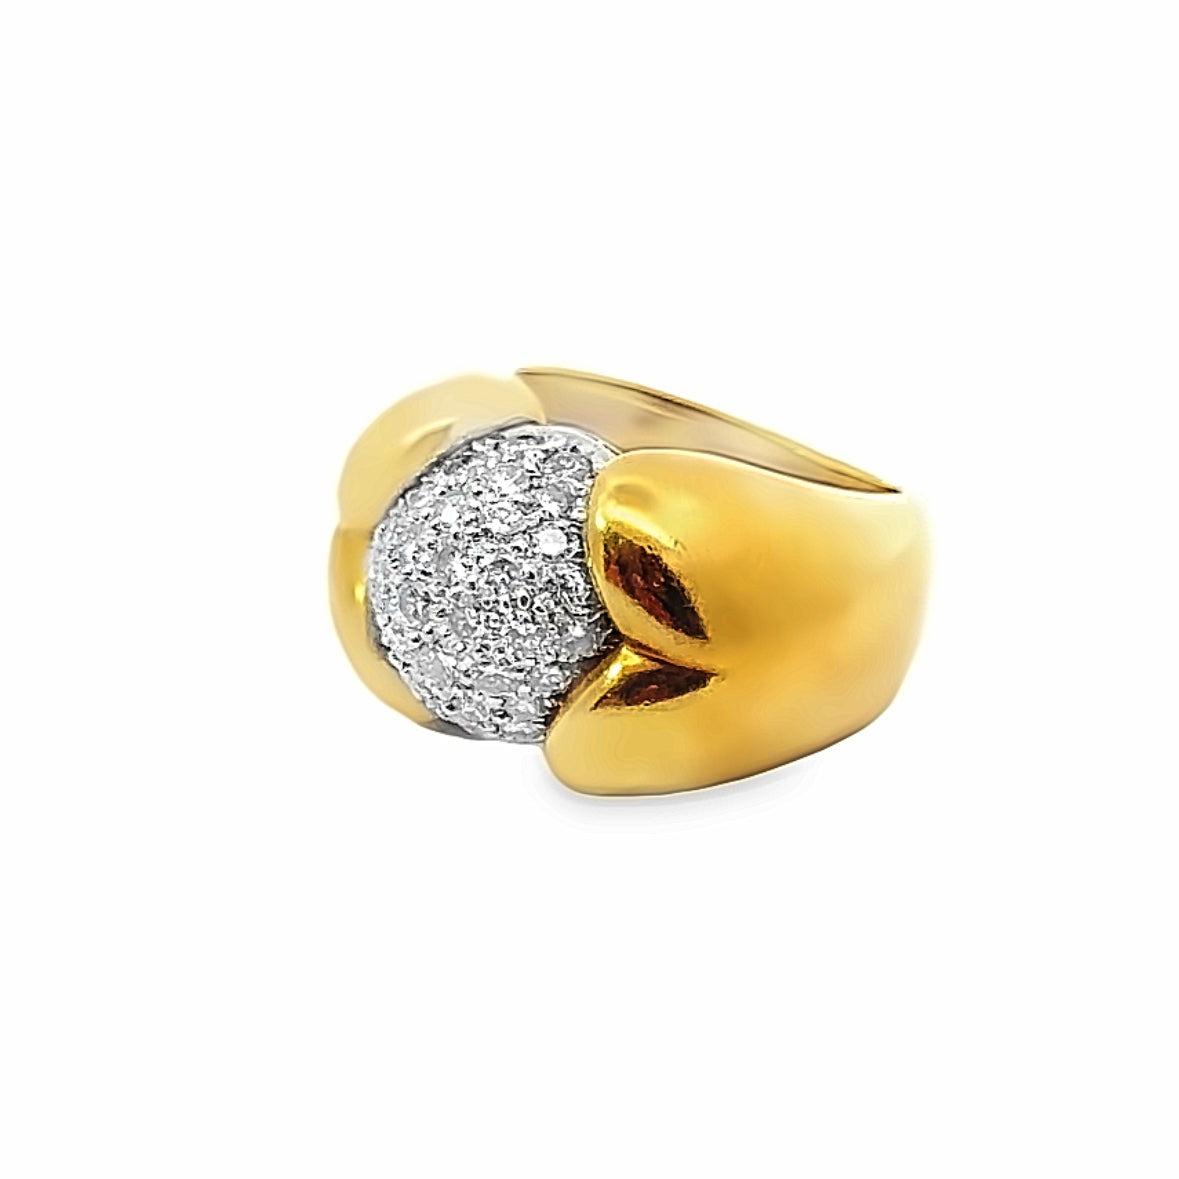 Vintage Charming 18K Yellow Gold Ring with Pave Set Diamonds in Platinum